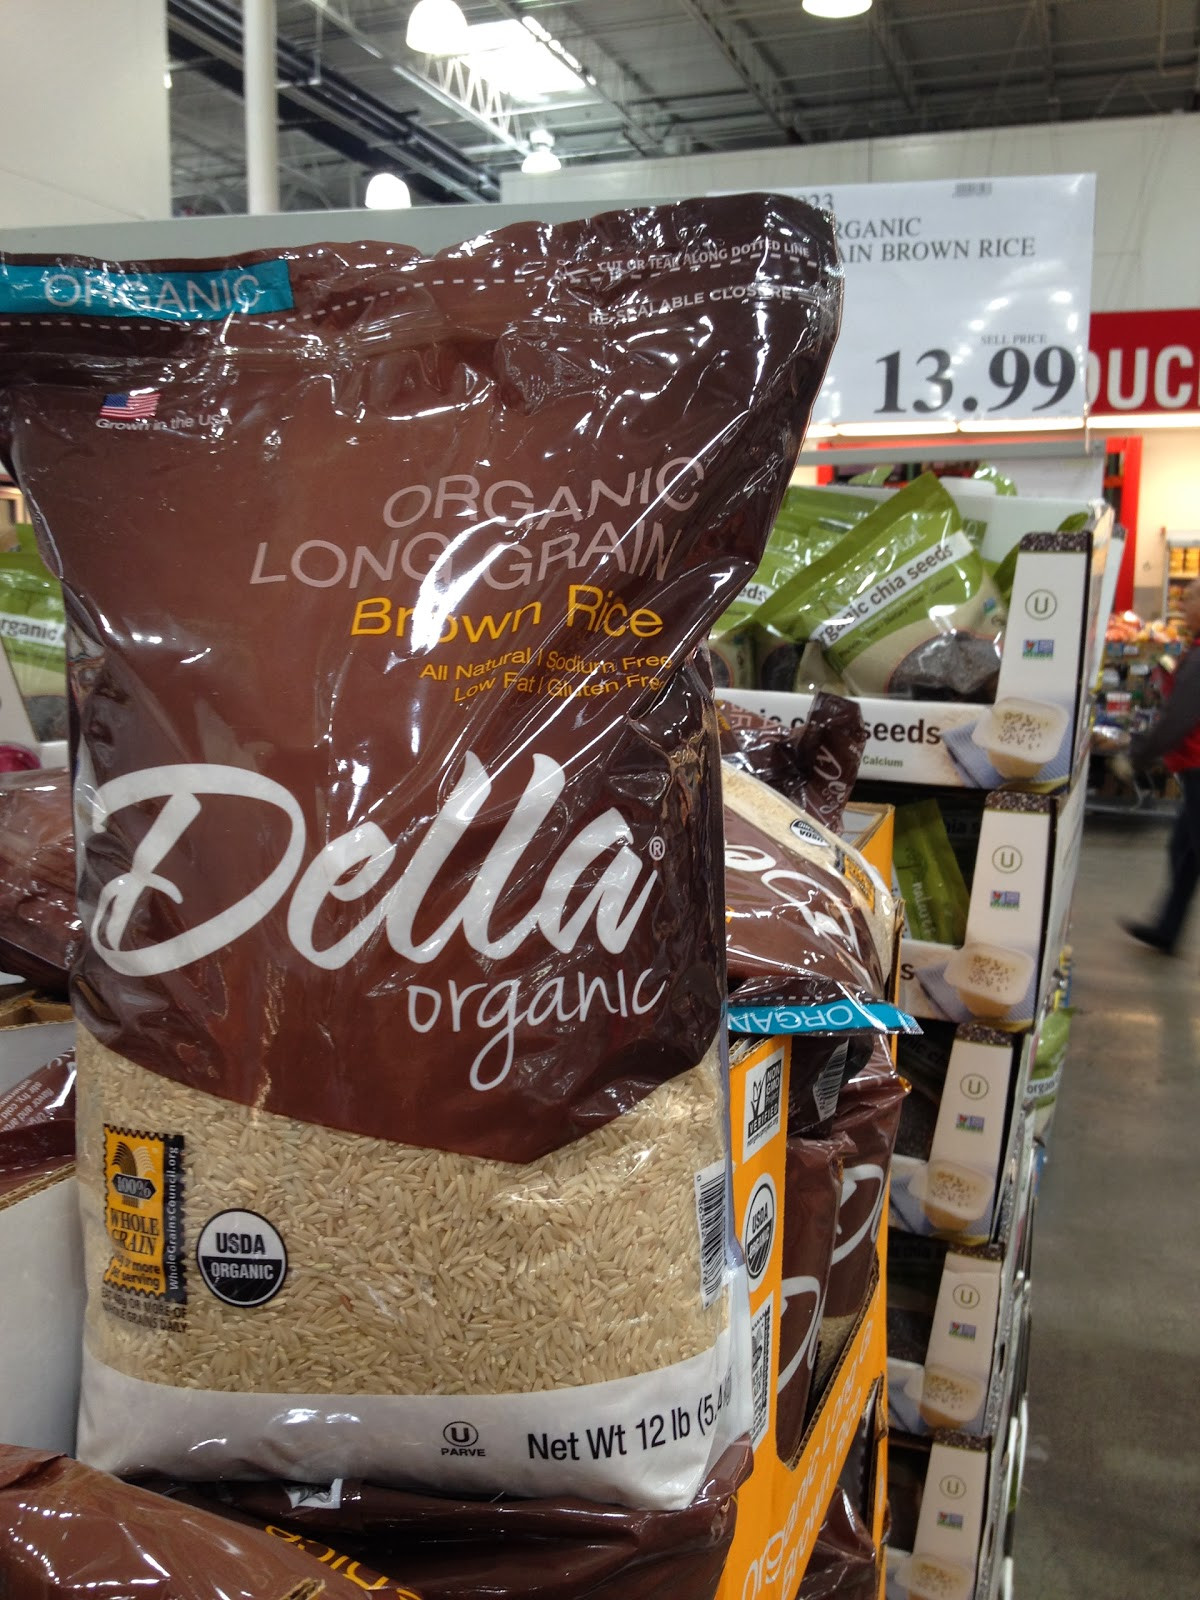 Della Organic Brown Rice
 Do You Really Know What You re Eating New items at